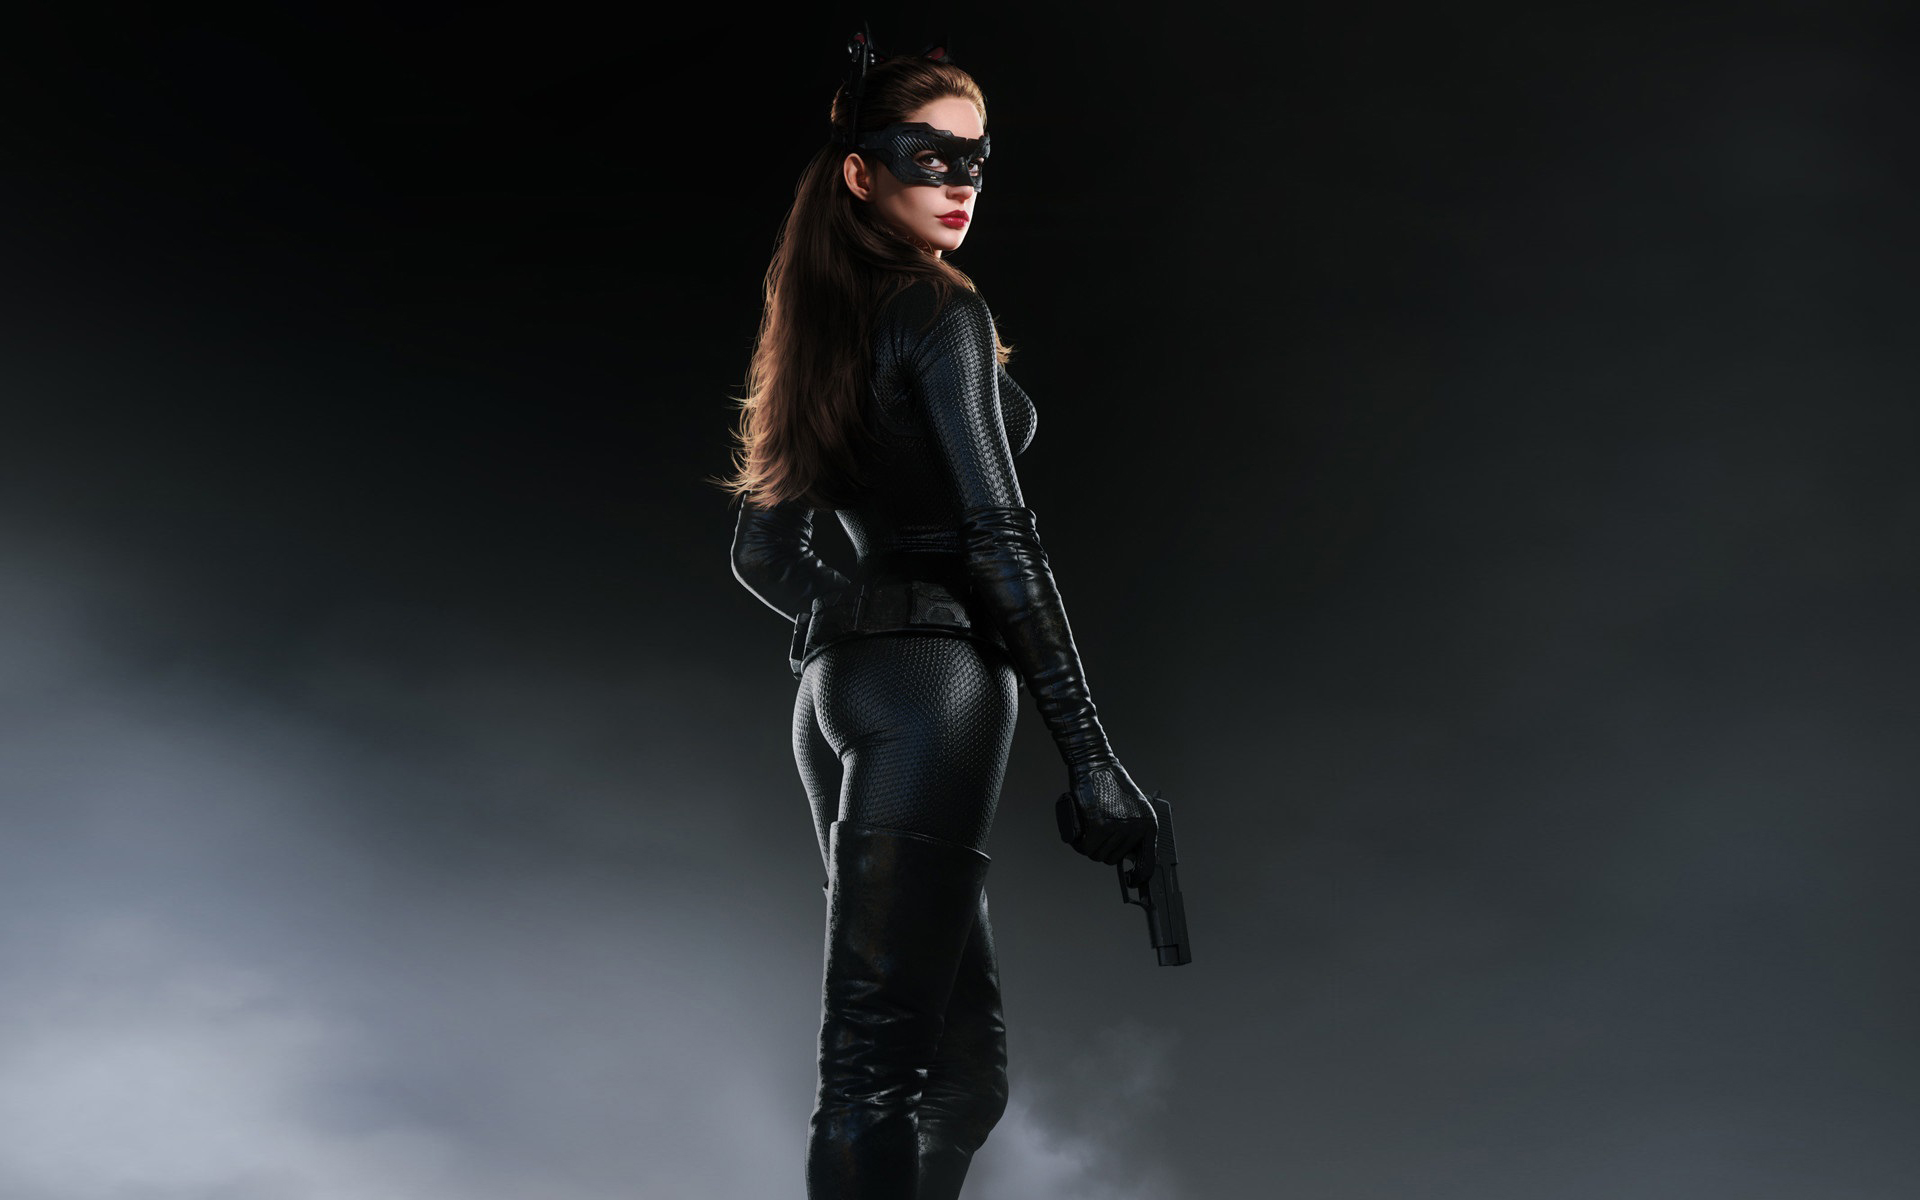 Anne Hathaway Catwoman The Dark Knight Rises 1920x1200